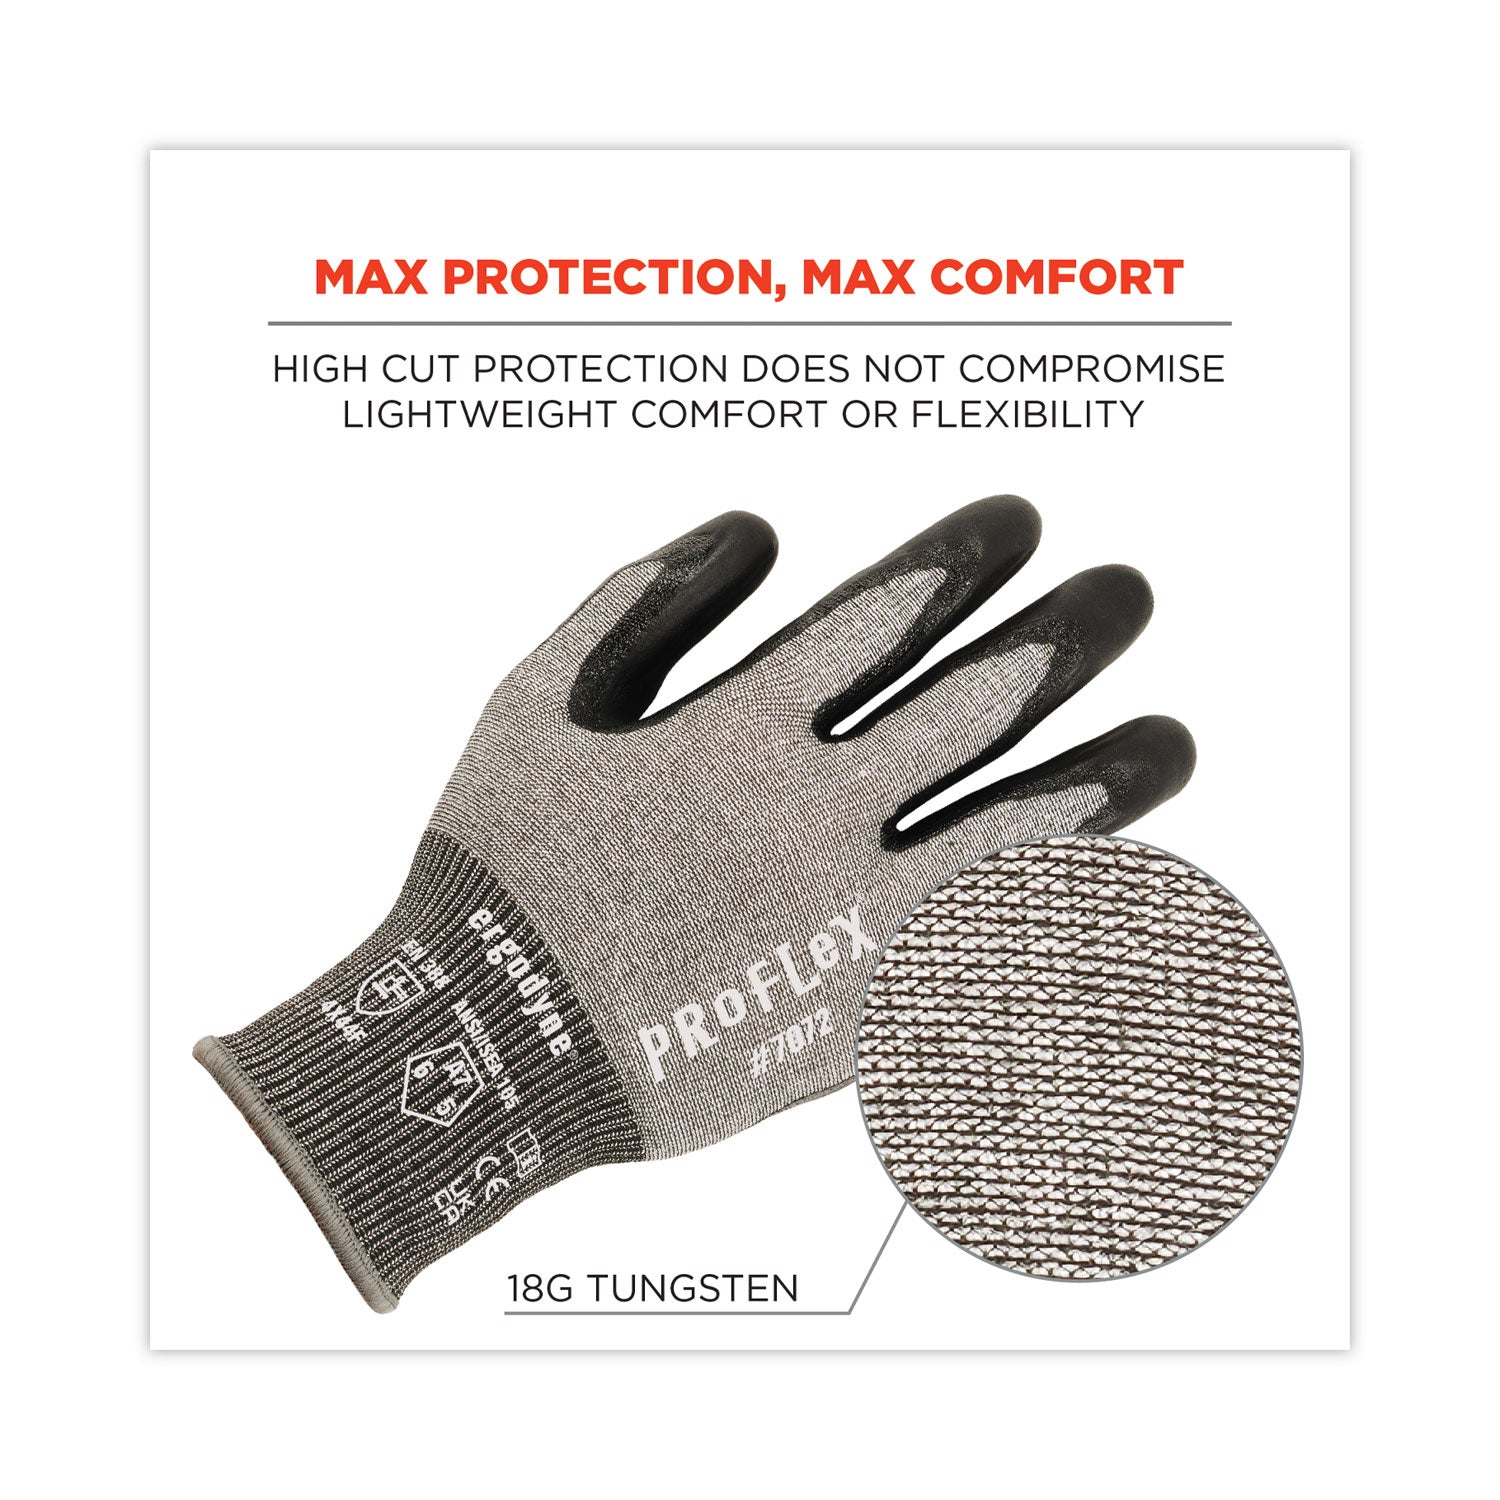 proflex-7072-ansi-a7-nitrile-coated-cr-gloves-gray-small-pair-ships-in-1-3-business-days_ego10312 - 5